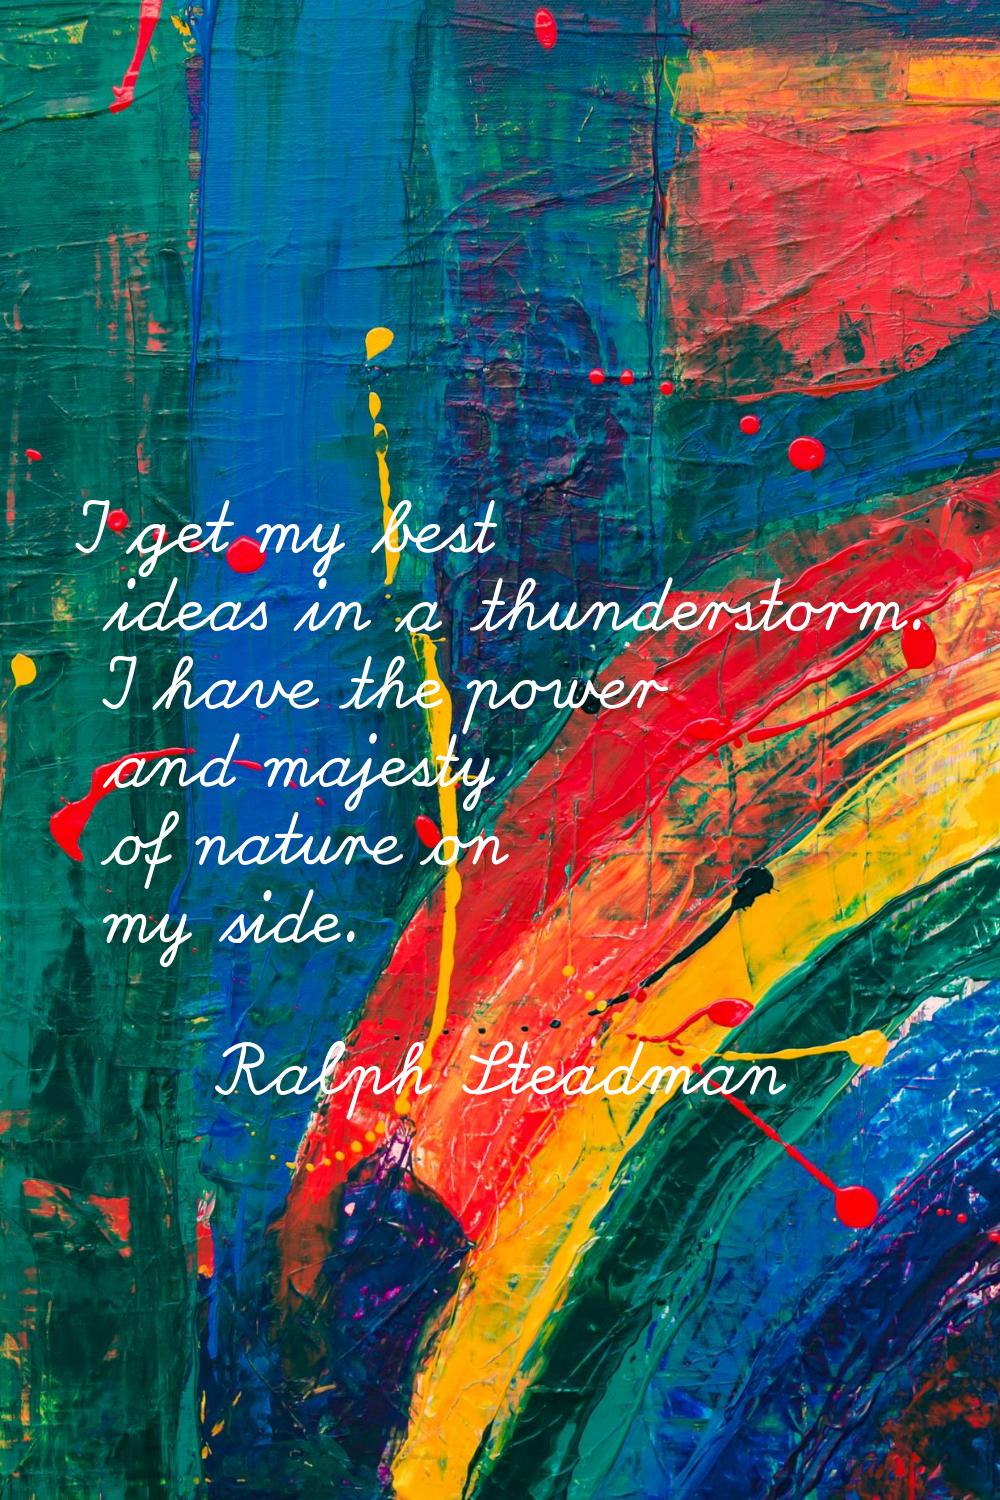 I get my best ideas in a thunderstorm. I have the power and majesty of nature on my side.